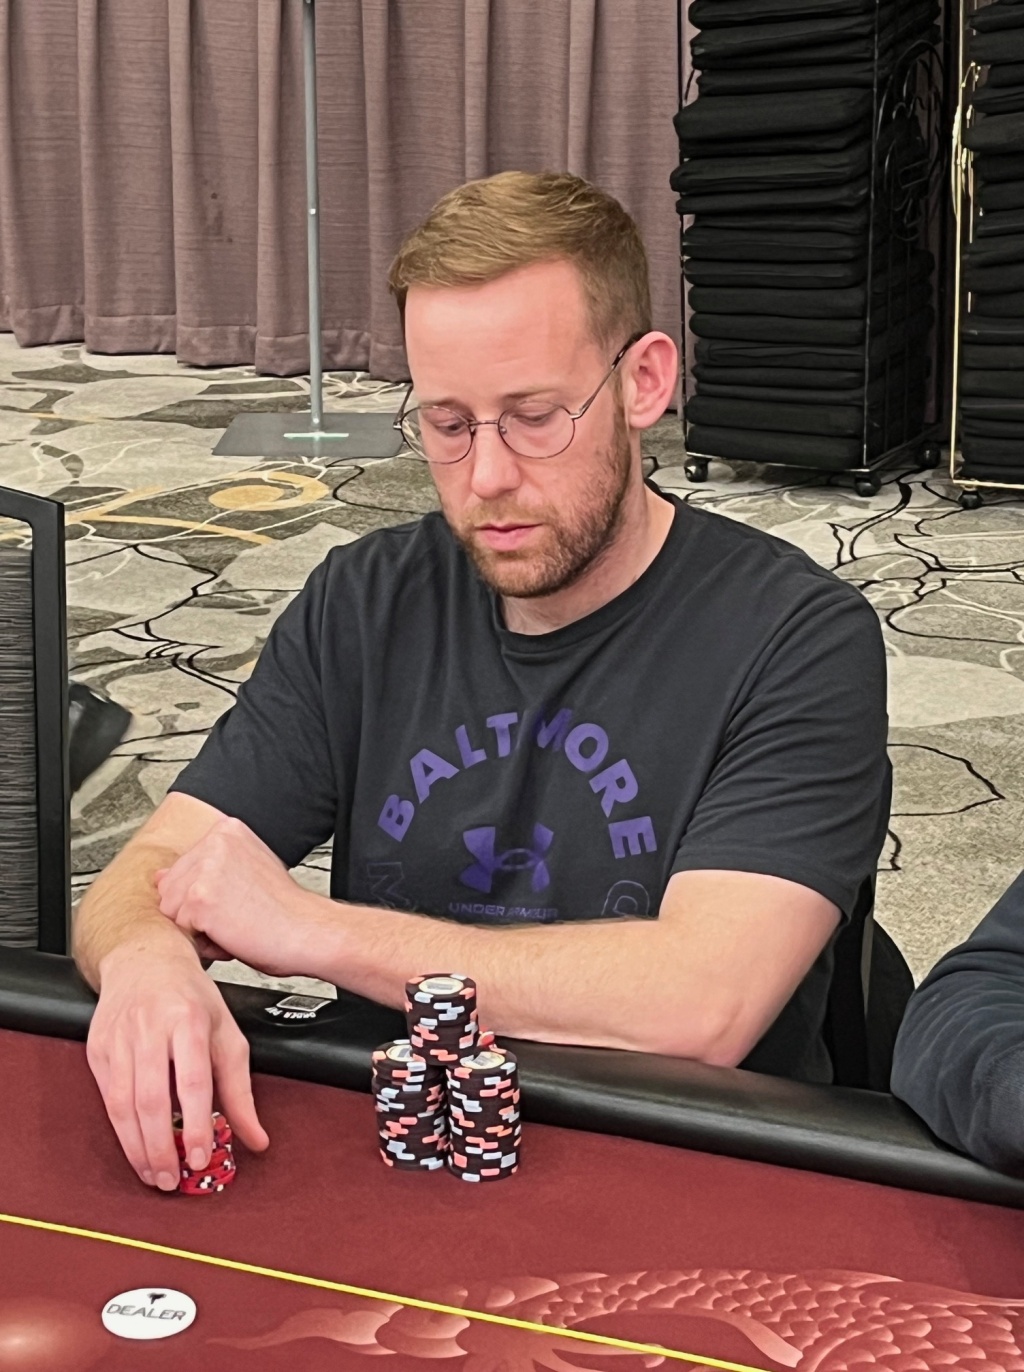 David Van Noy Eliminated in 4th Place ($21,390)